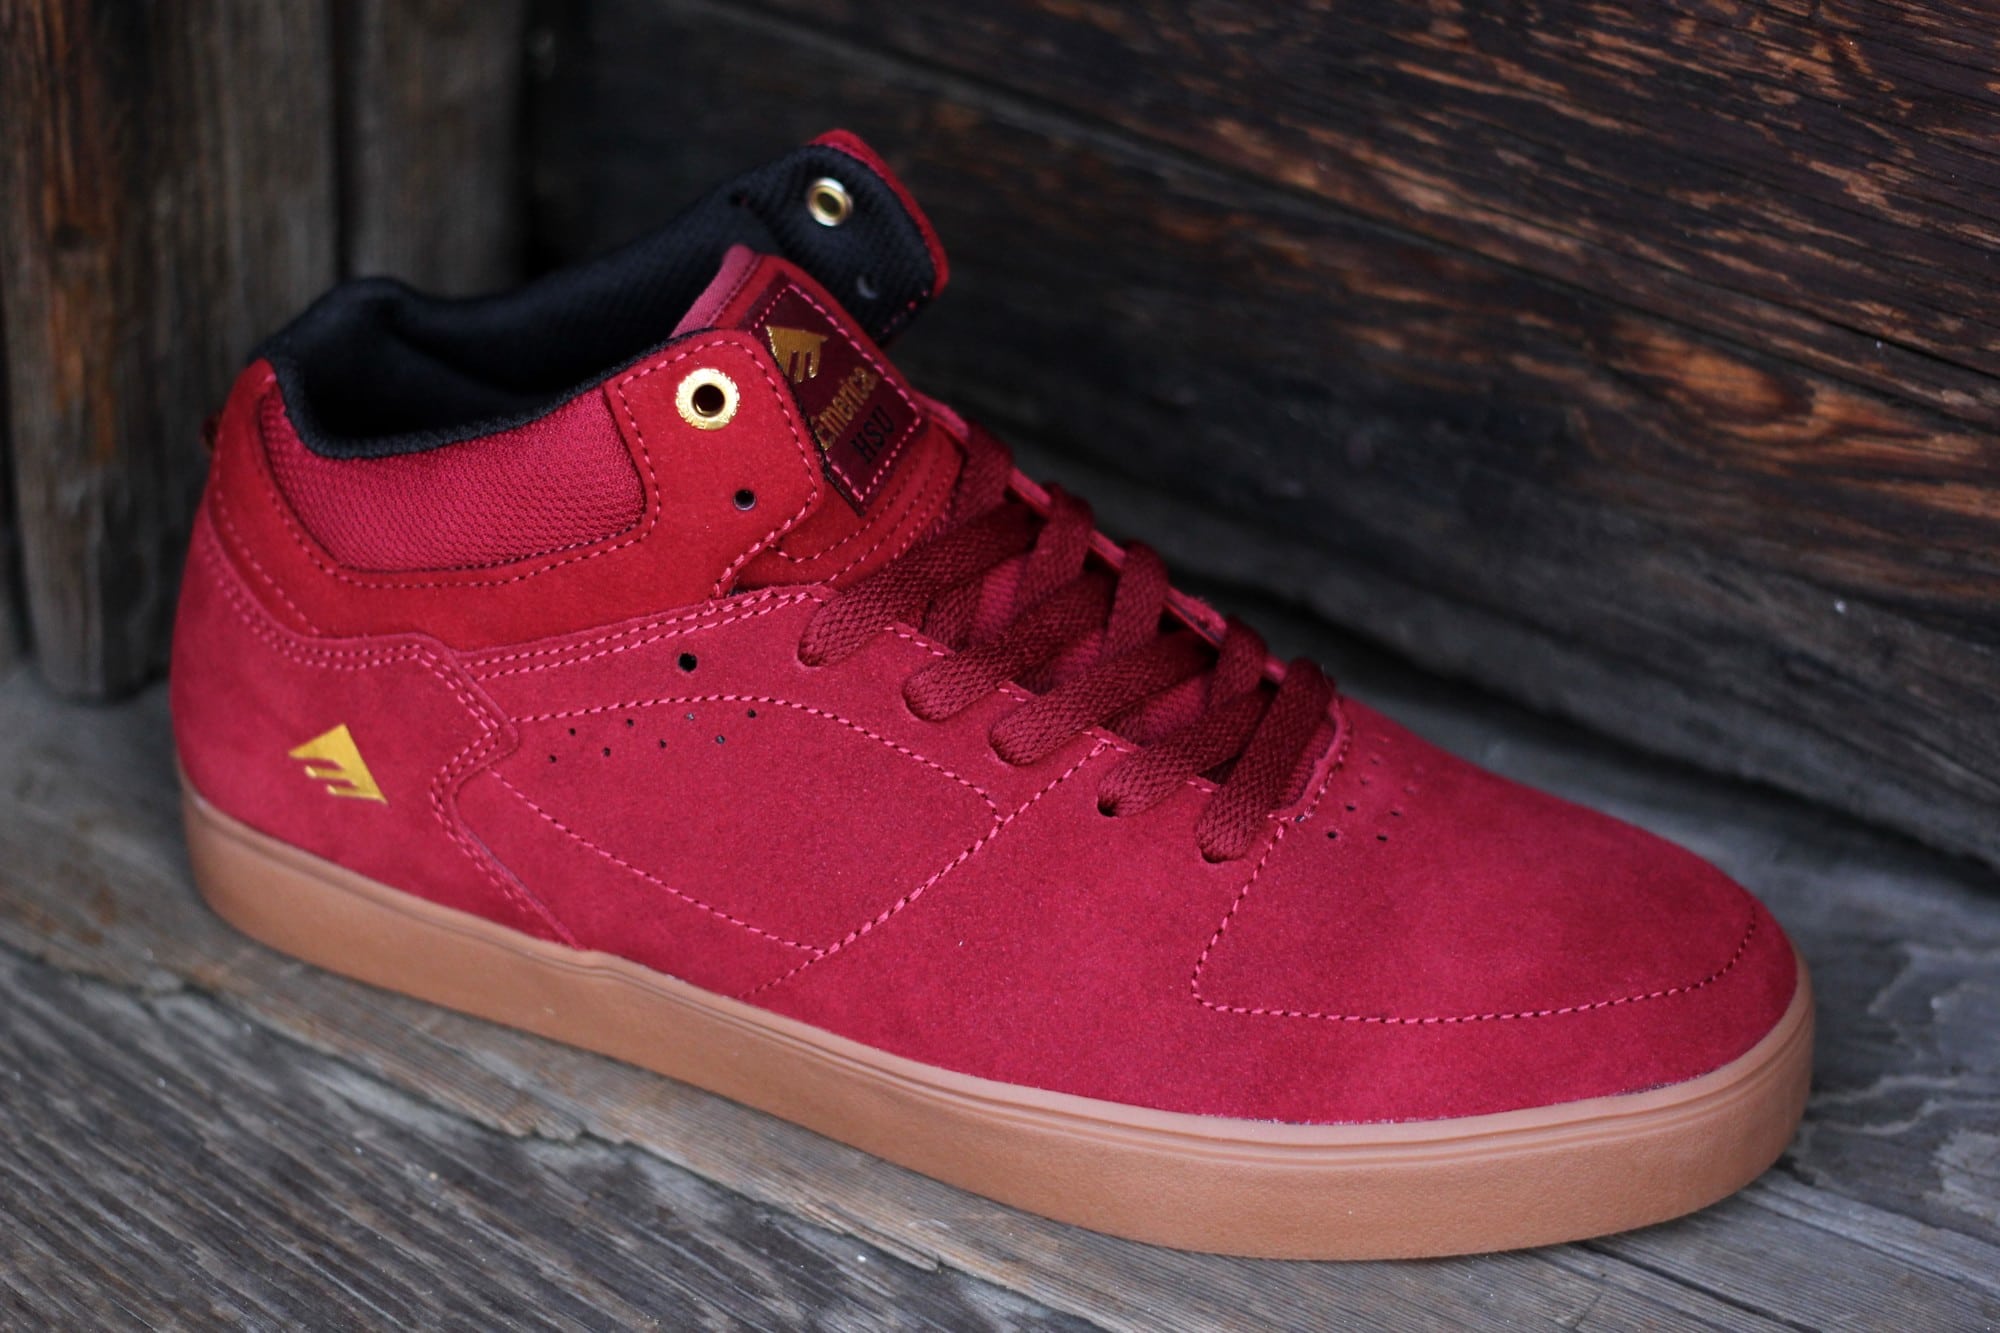 Emerica Hsu G6 Skate Shoes - AVAILABLE 